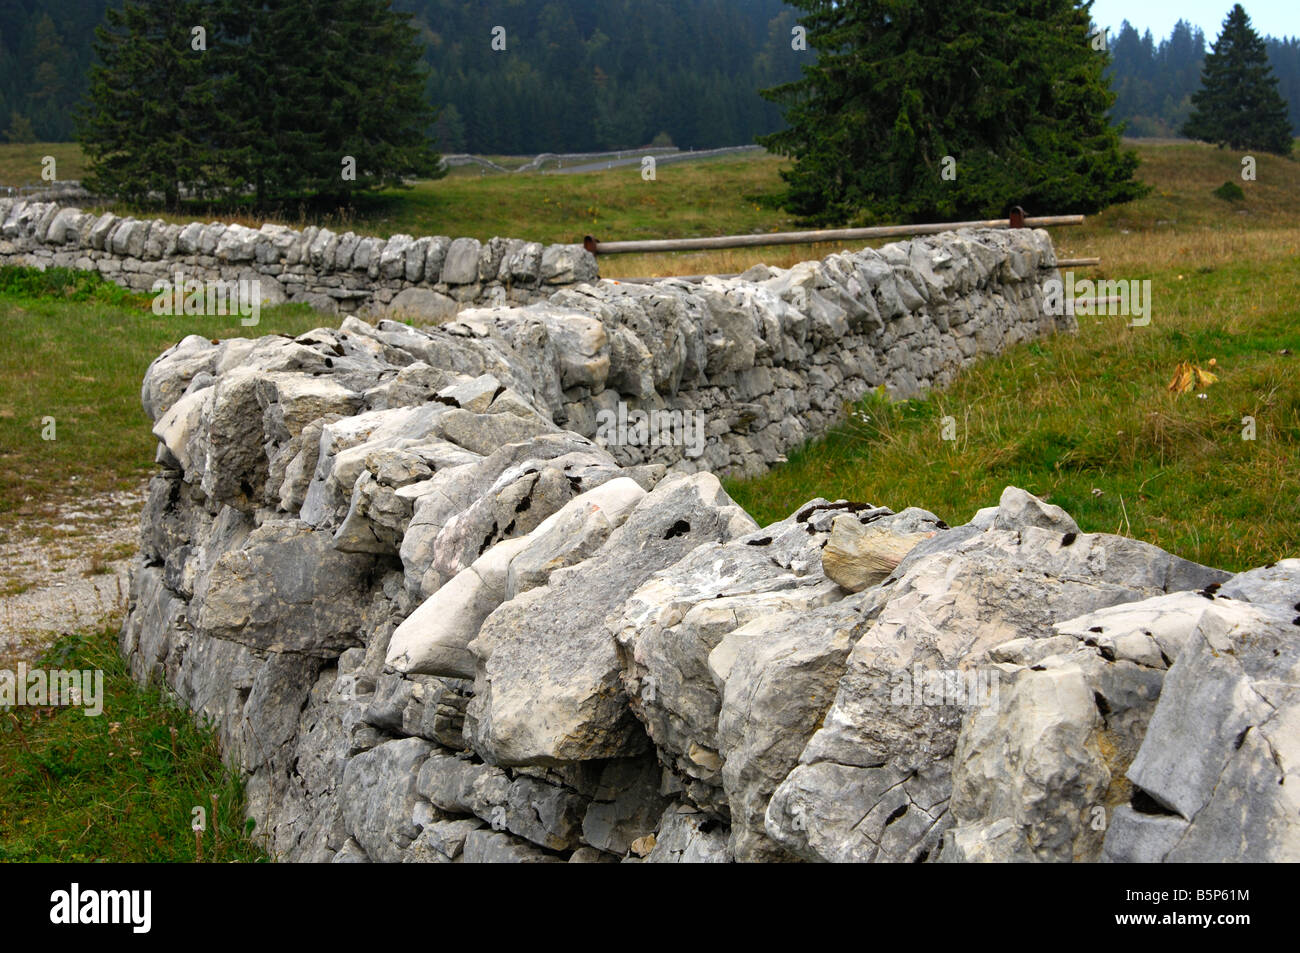 Dry stone wall traditional pasture fencing in the Jura region, Col du Marchairuz, canton of Vaud, Switzerland Stock Photo